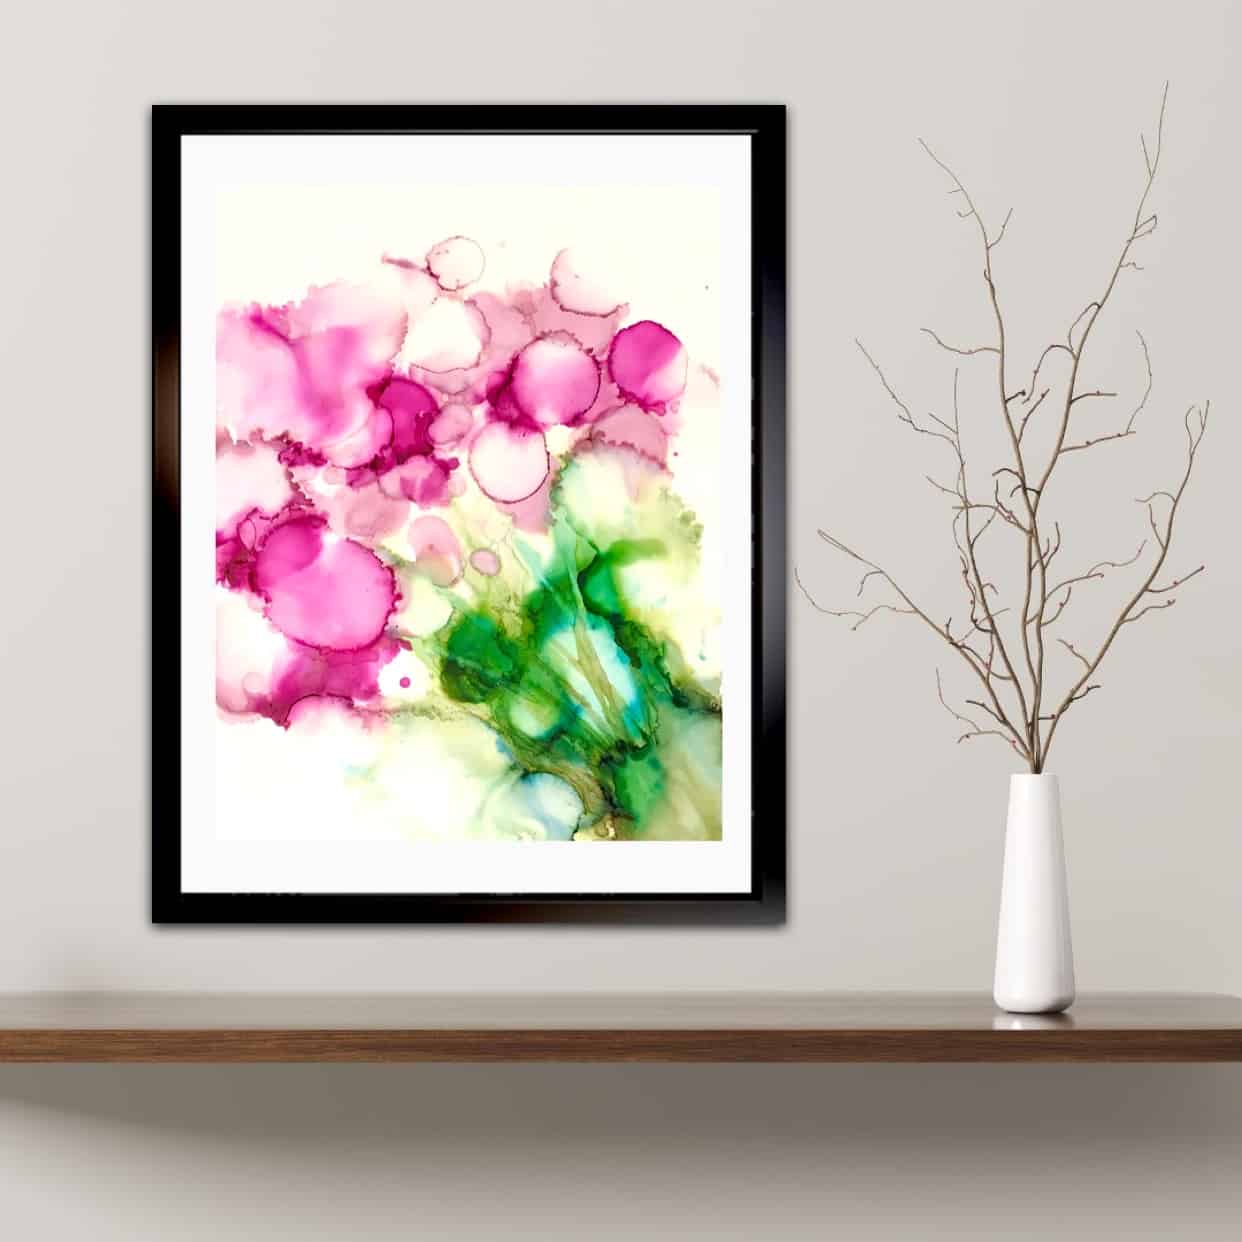 Abstract Alcohol Ink Art Bouquet of Roses